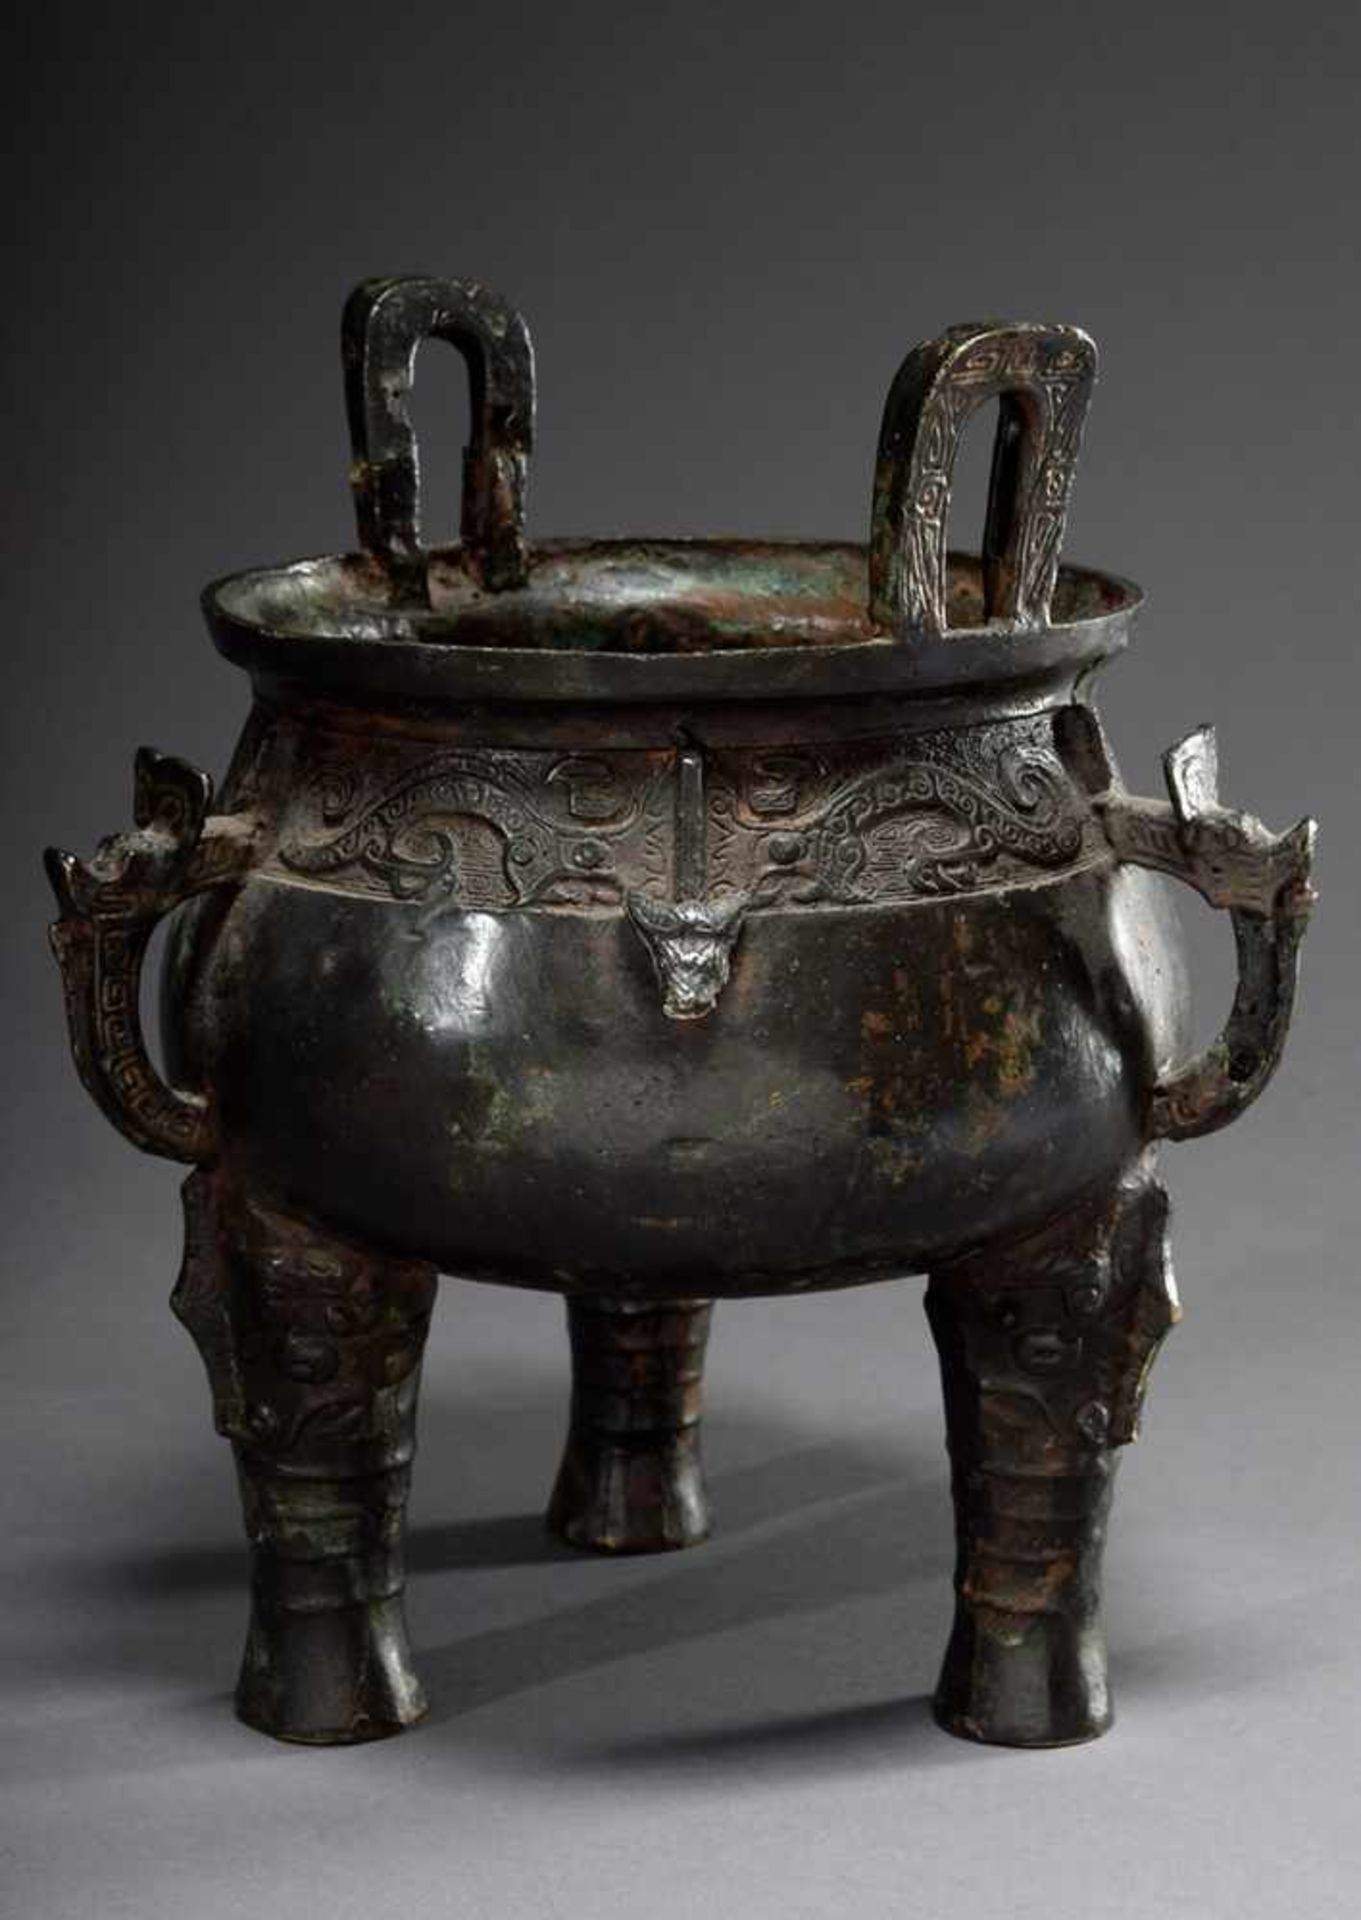 Bronze ritual vessel of the type "Ding" with archaic ornamental frieze on 3 legs, China 18th/19th